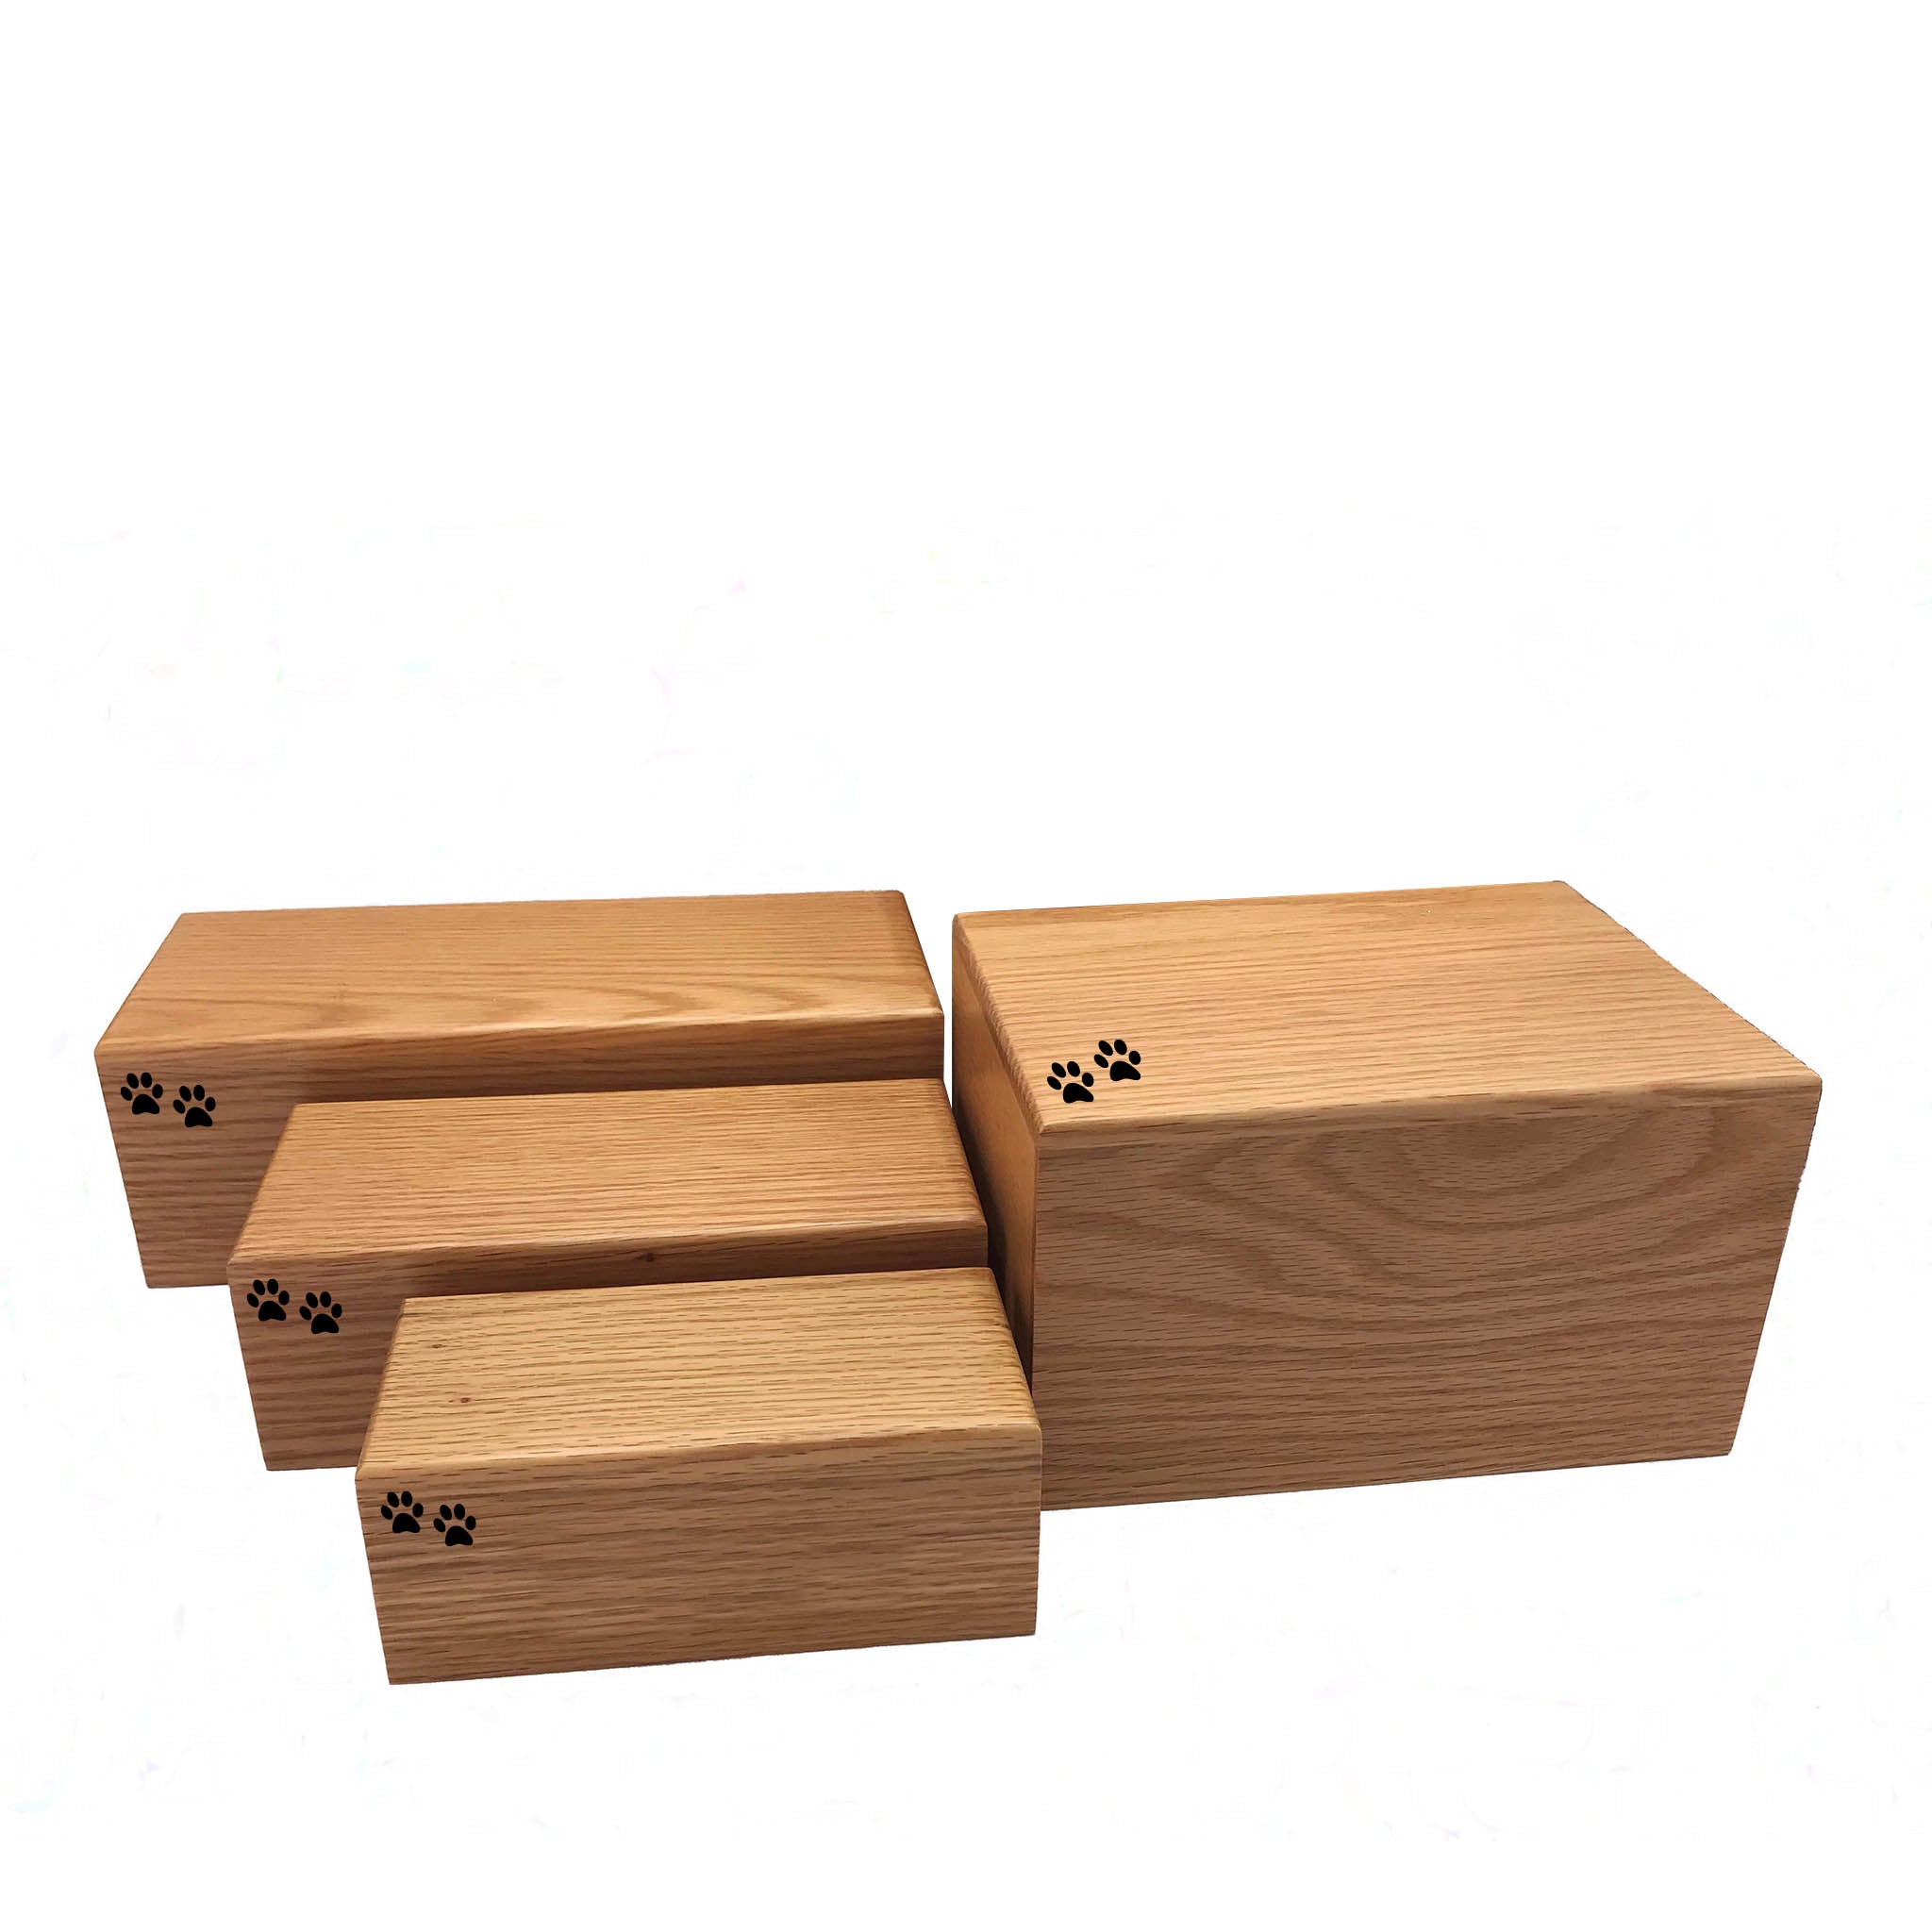 Solid Oak Wood Box – Sleepy Hollow Pet Memorial Park and Cremation Services